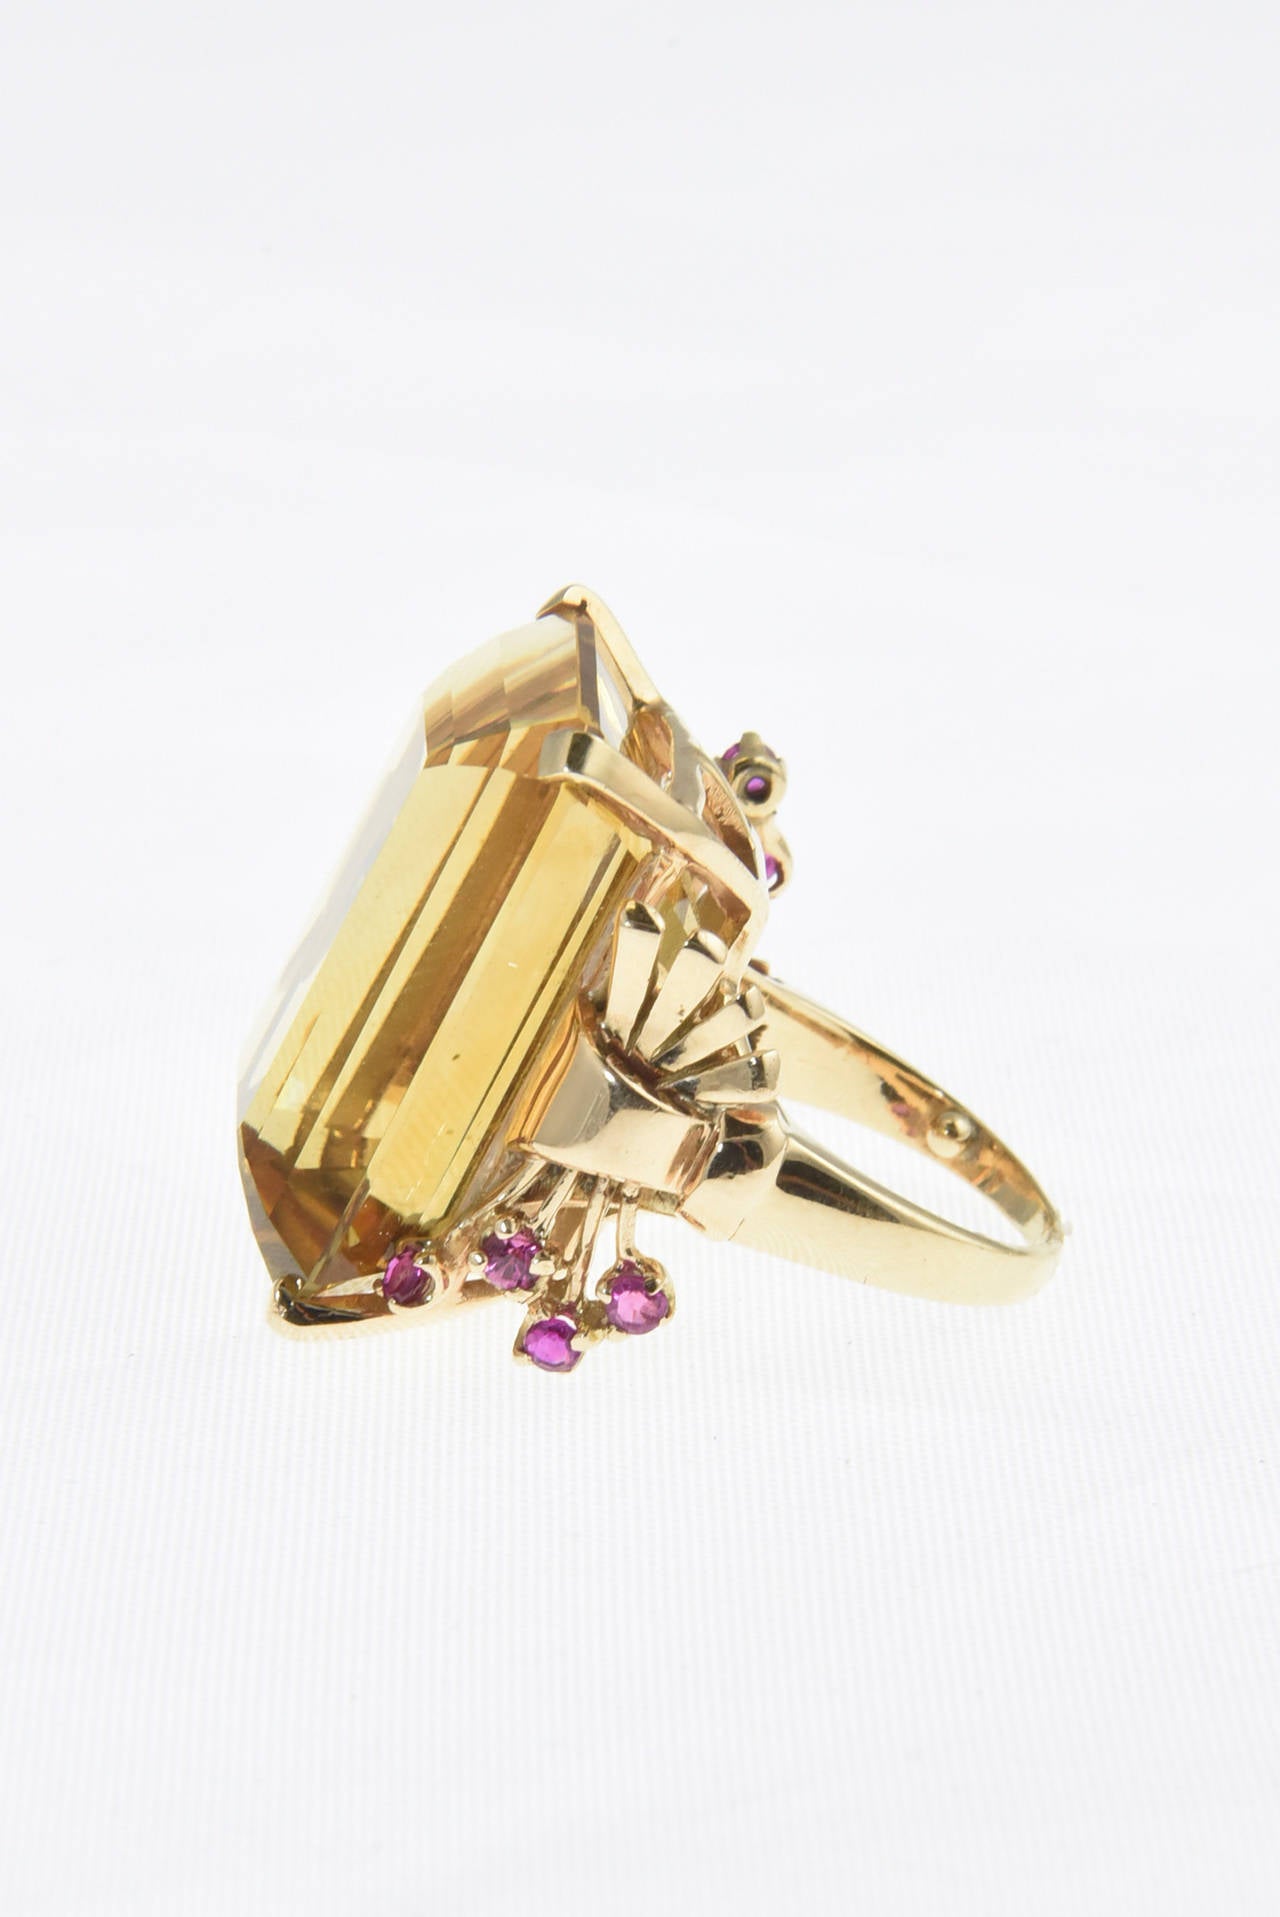 Women's 1940s Retro Citrine and Ruby Rose Gold Ring